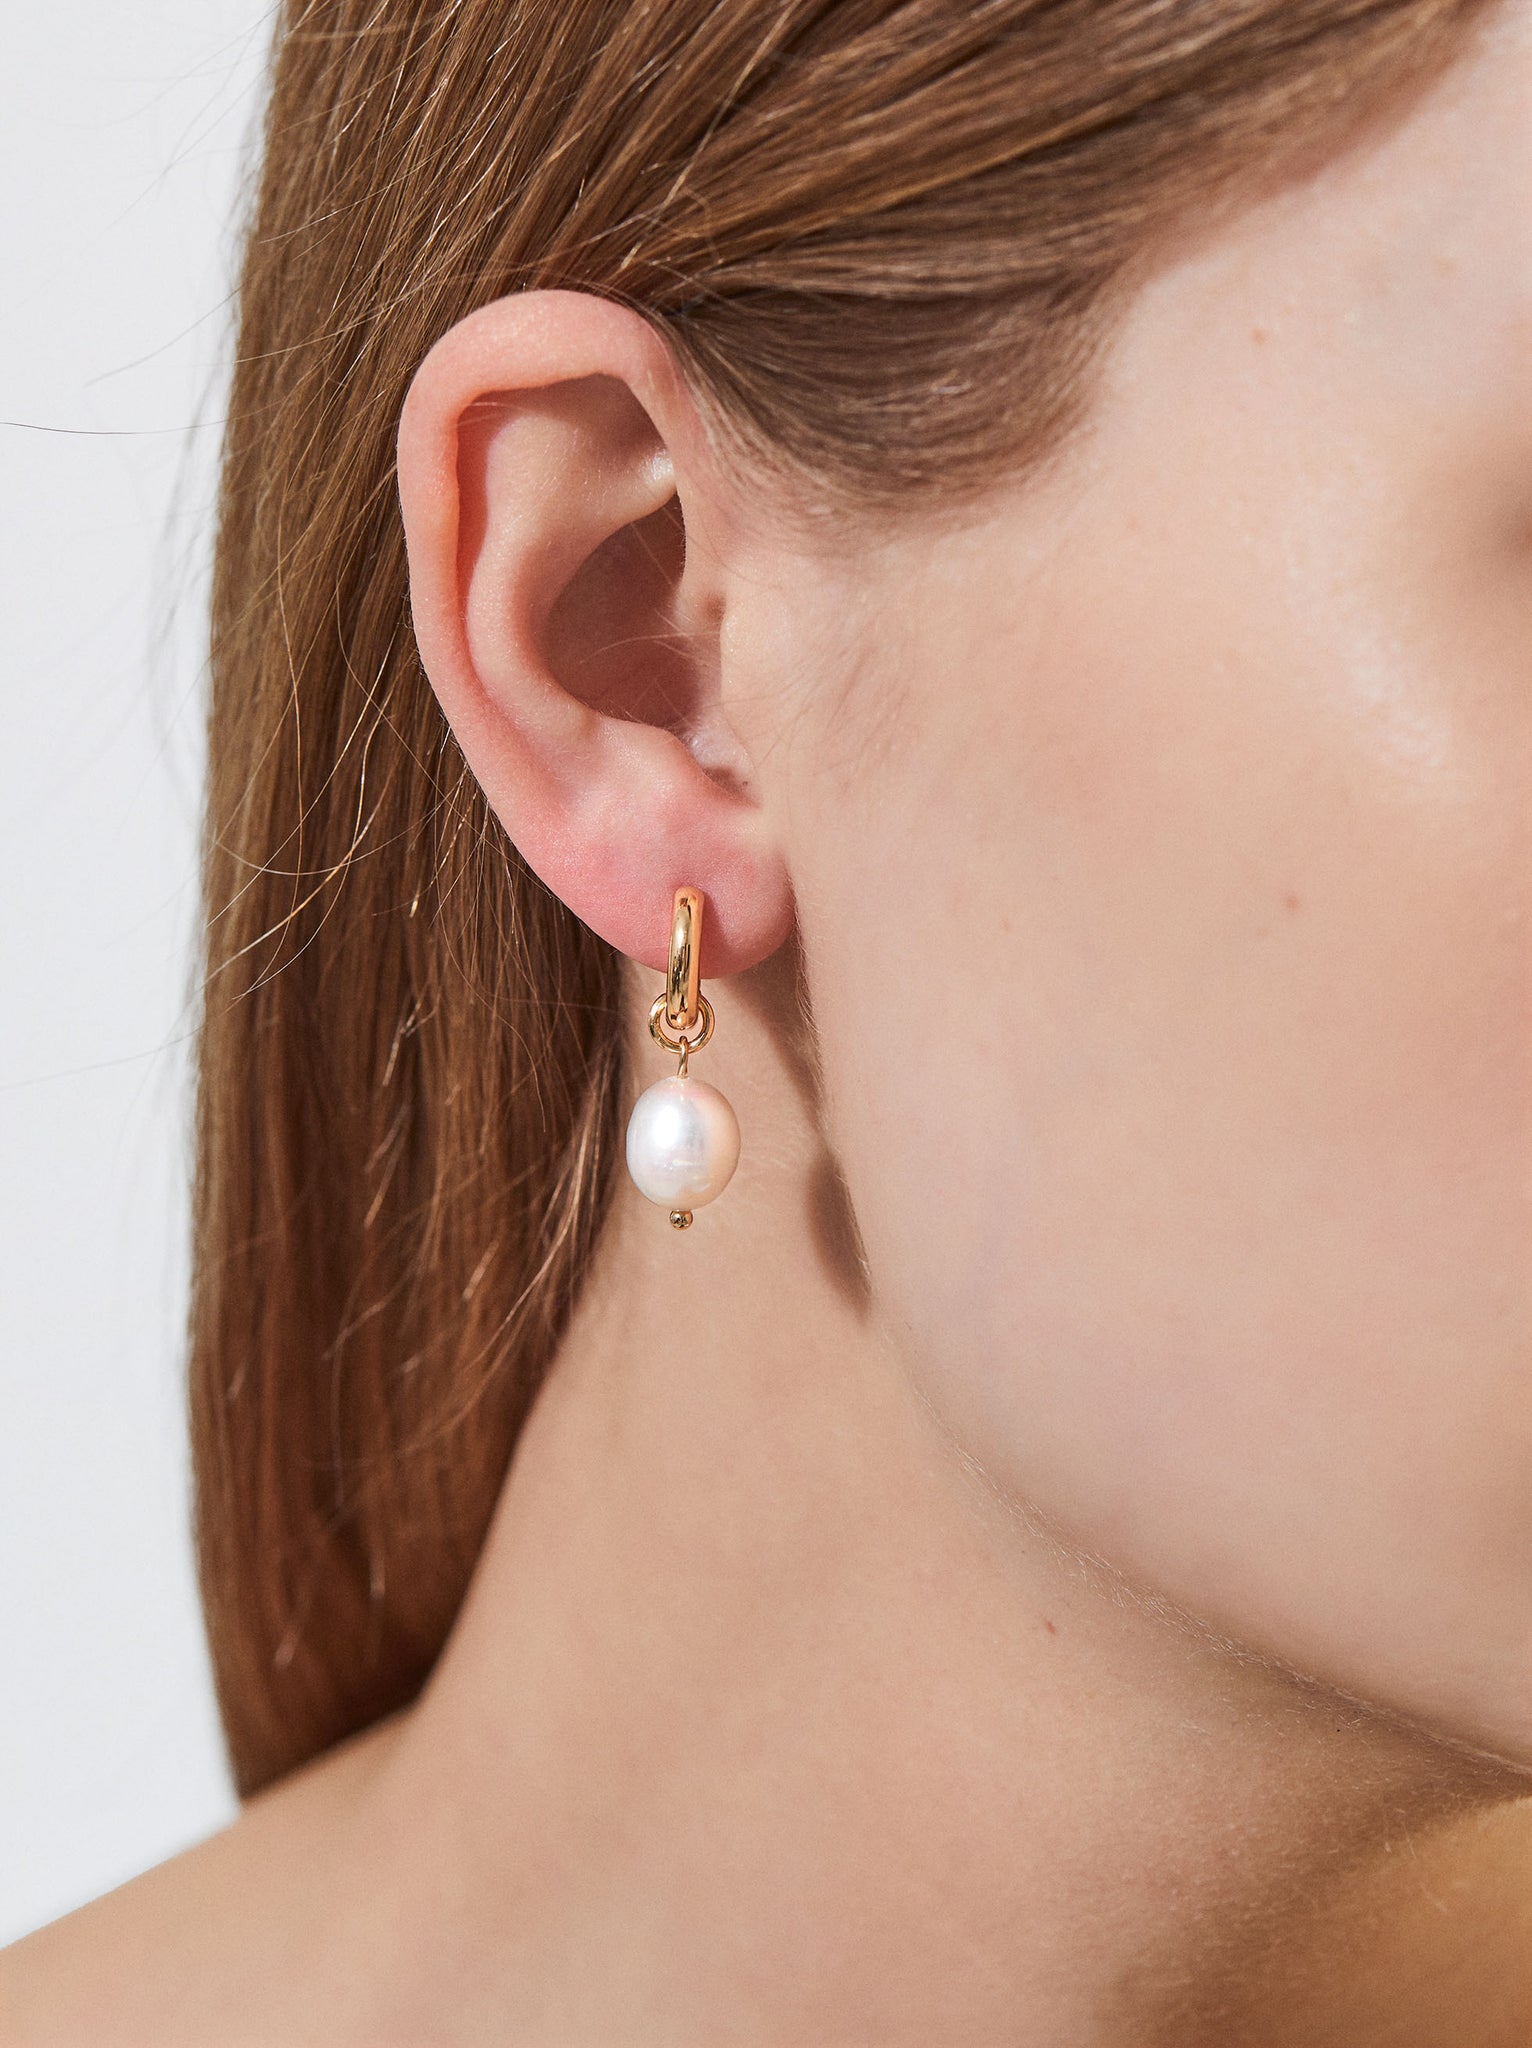 Gold-Toned Hoop Earrings With Freshwater Pearls